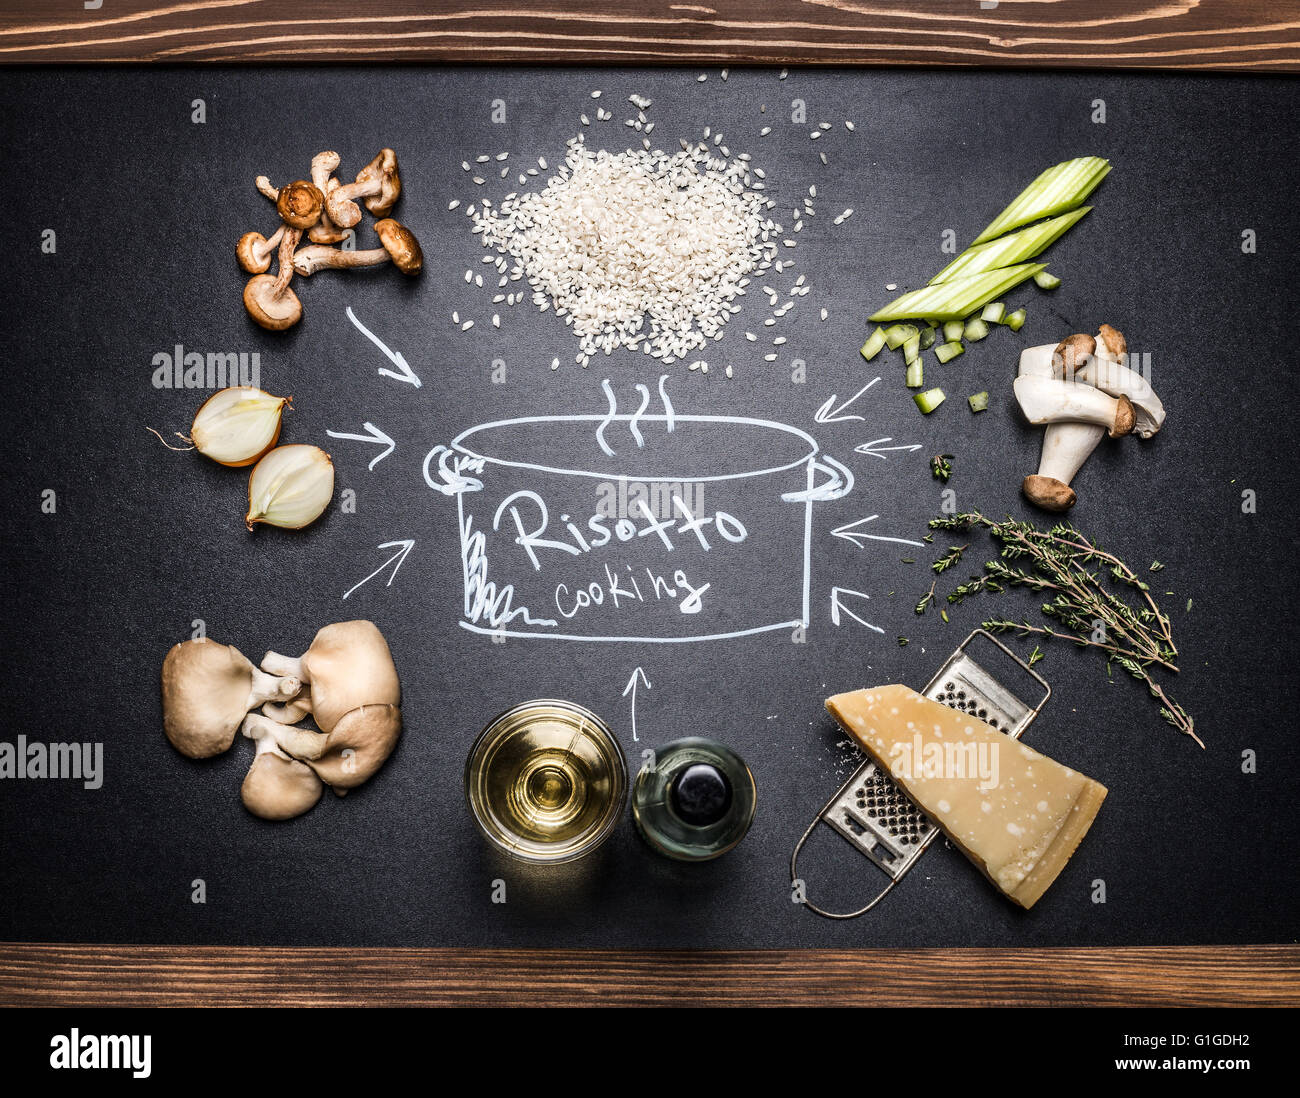 Cooking Ingredients for mushrooms risotto with  hand drawings on dark chalkboard. Italian food Stock Photo